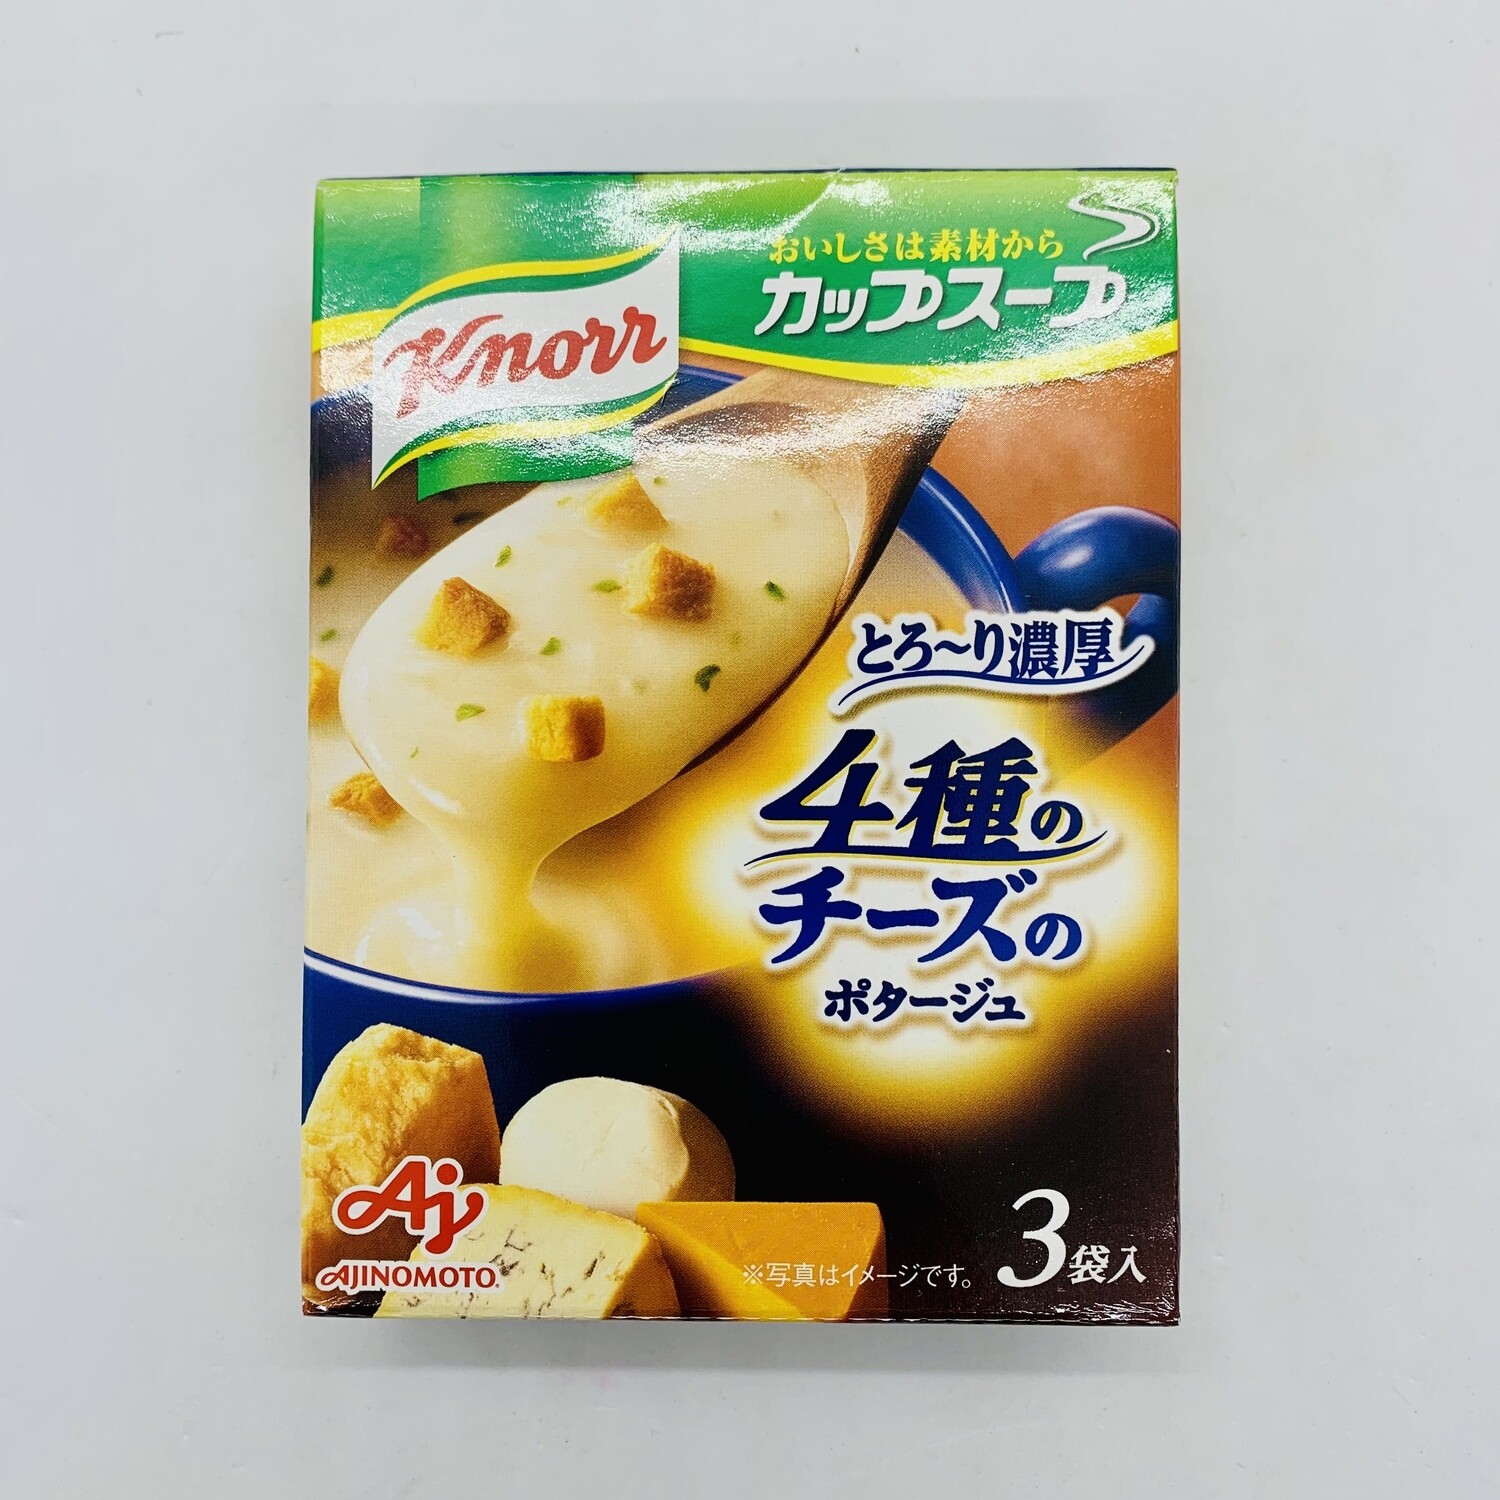 Knorr Cup Soup 4cheese